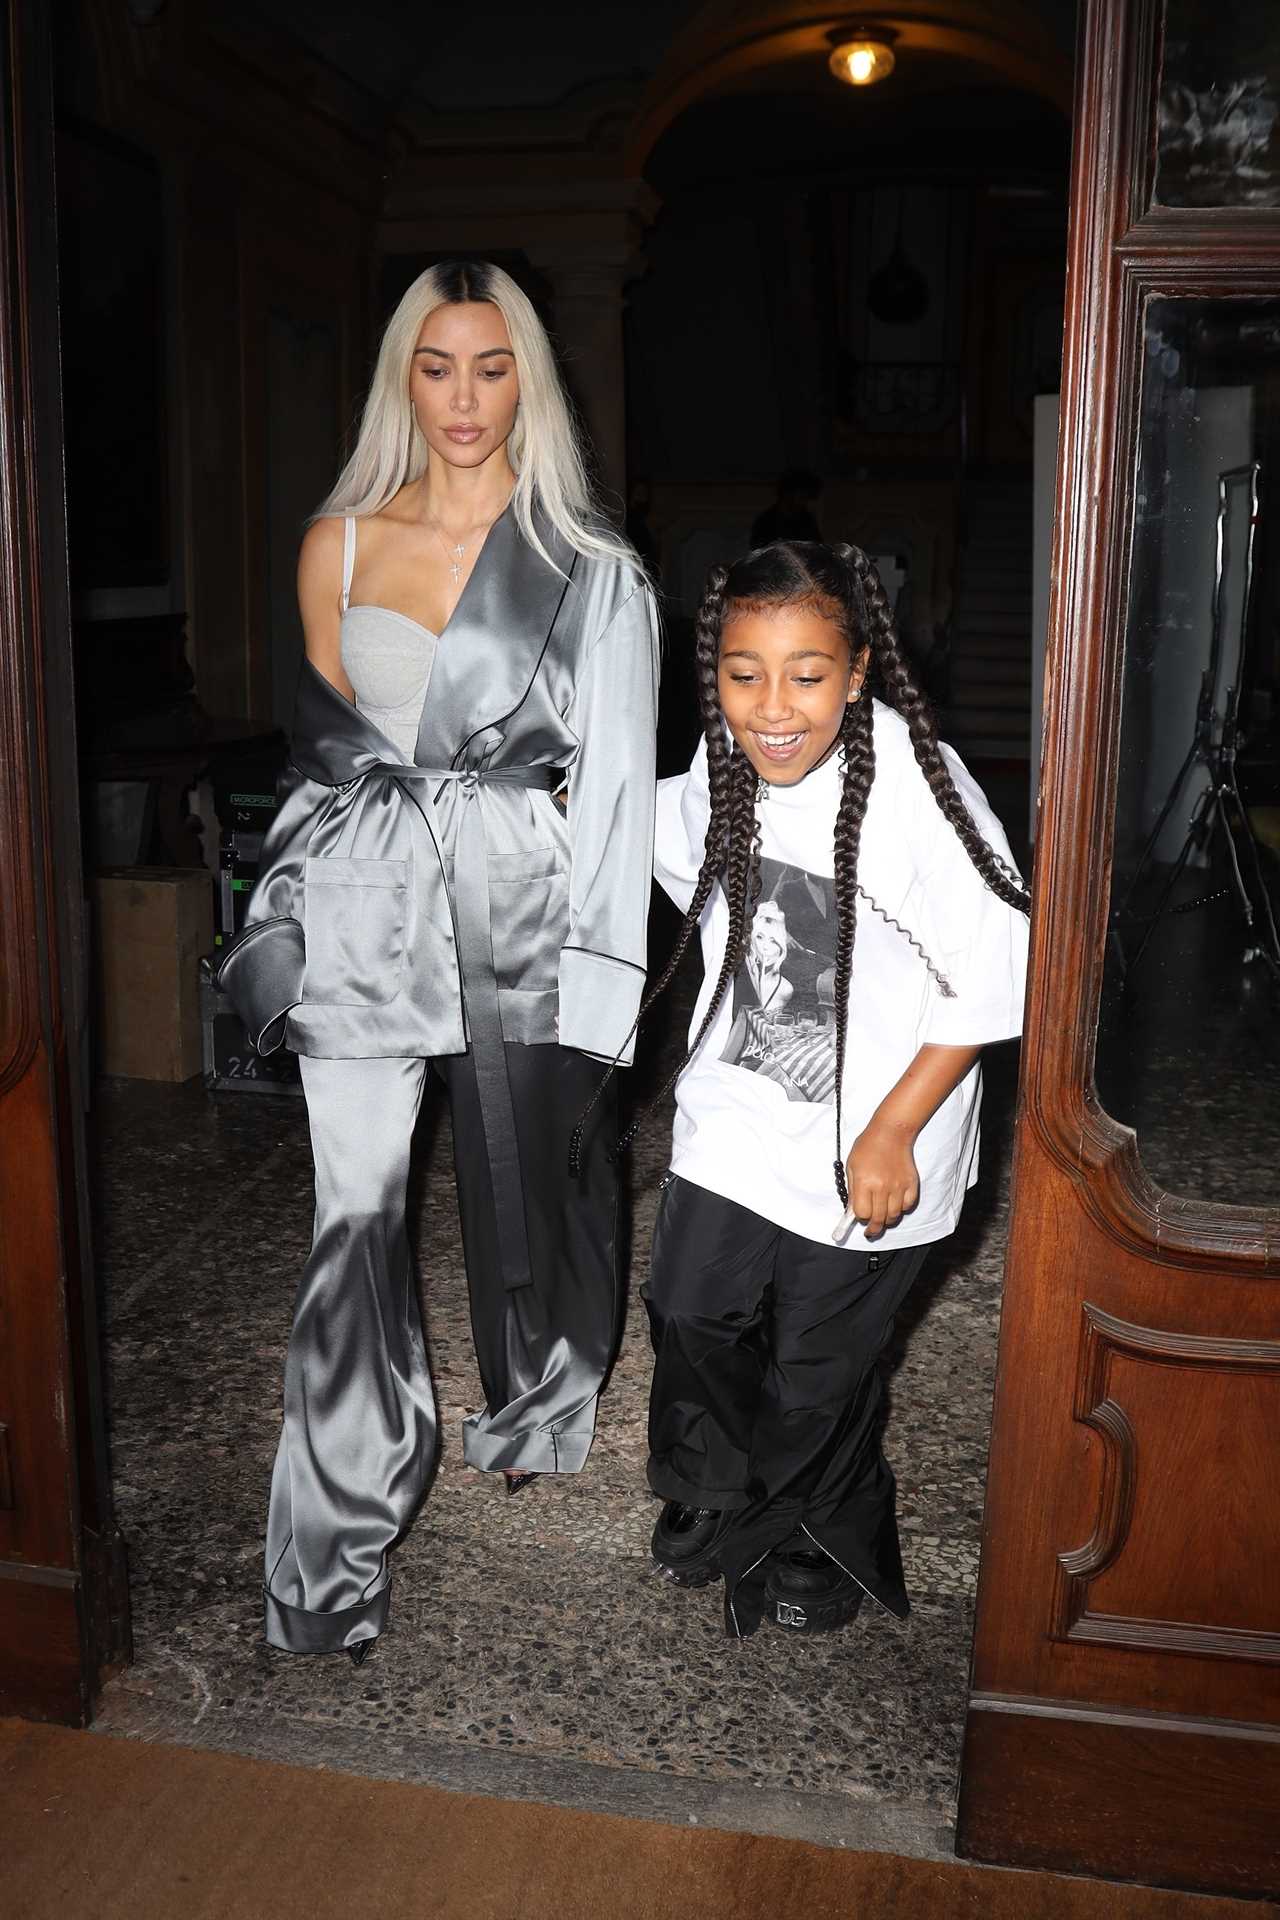 Kardashian fans slam Kim’s parenting after North, 9, is seen covering her full face with leather mask in ‘sad’ new pics